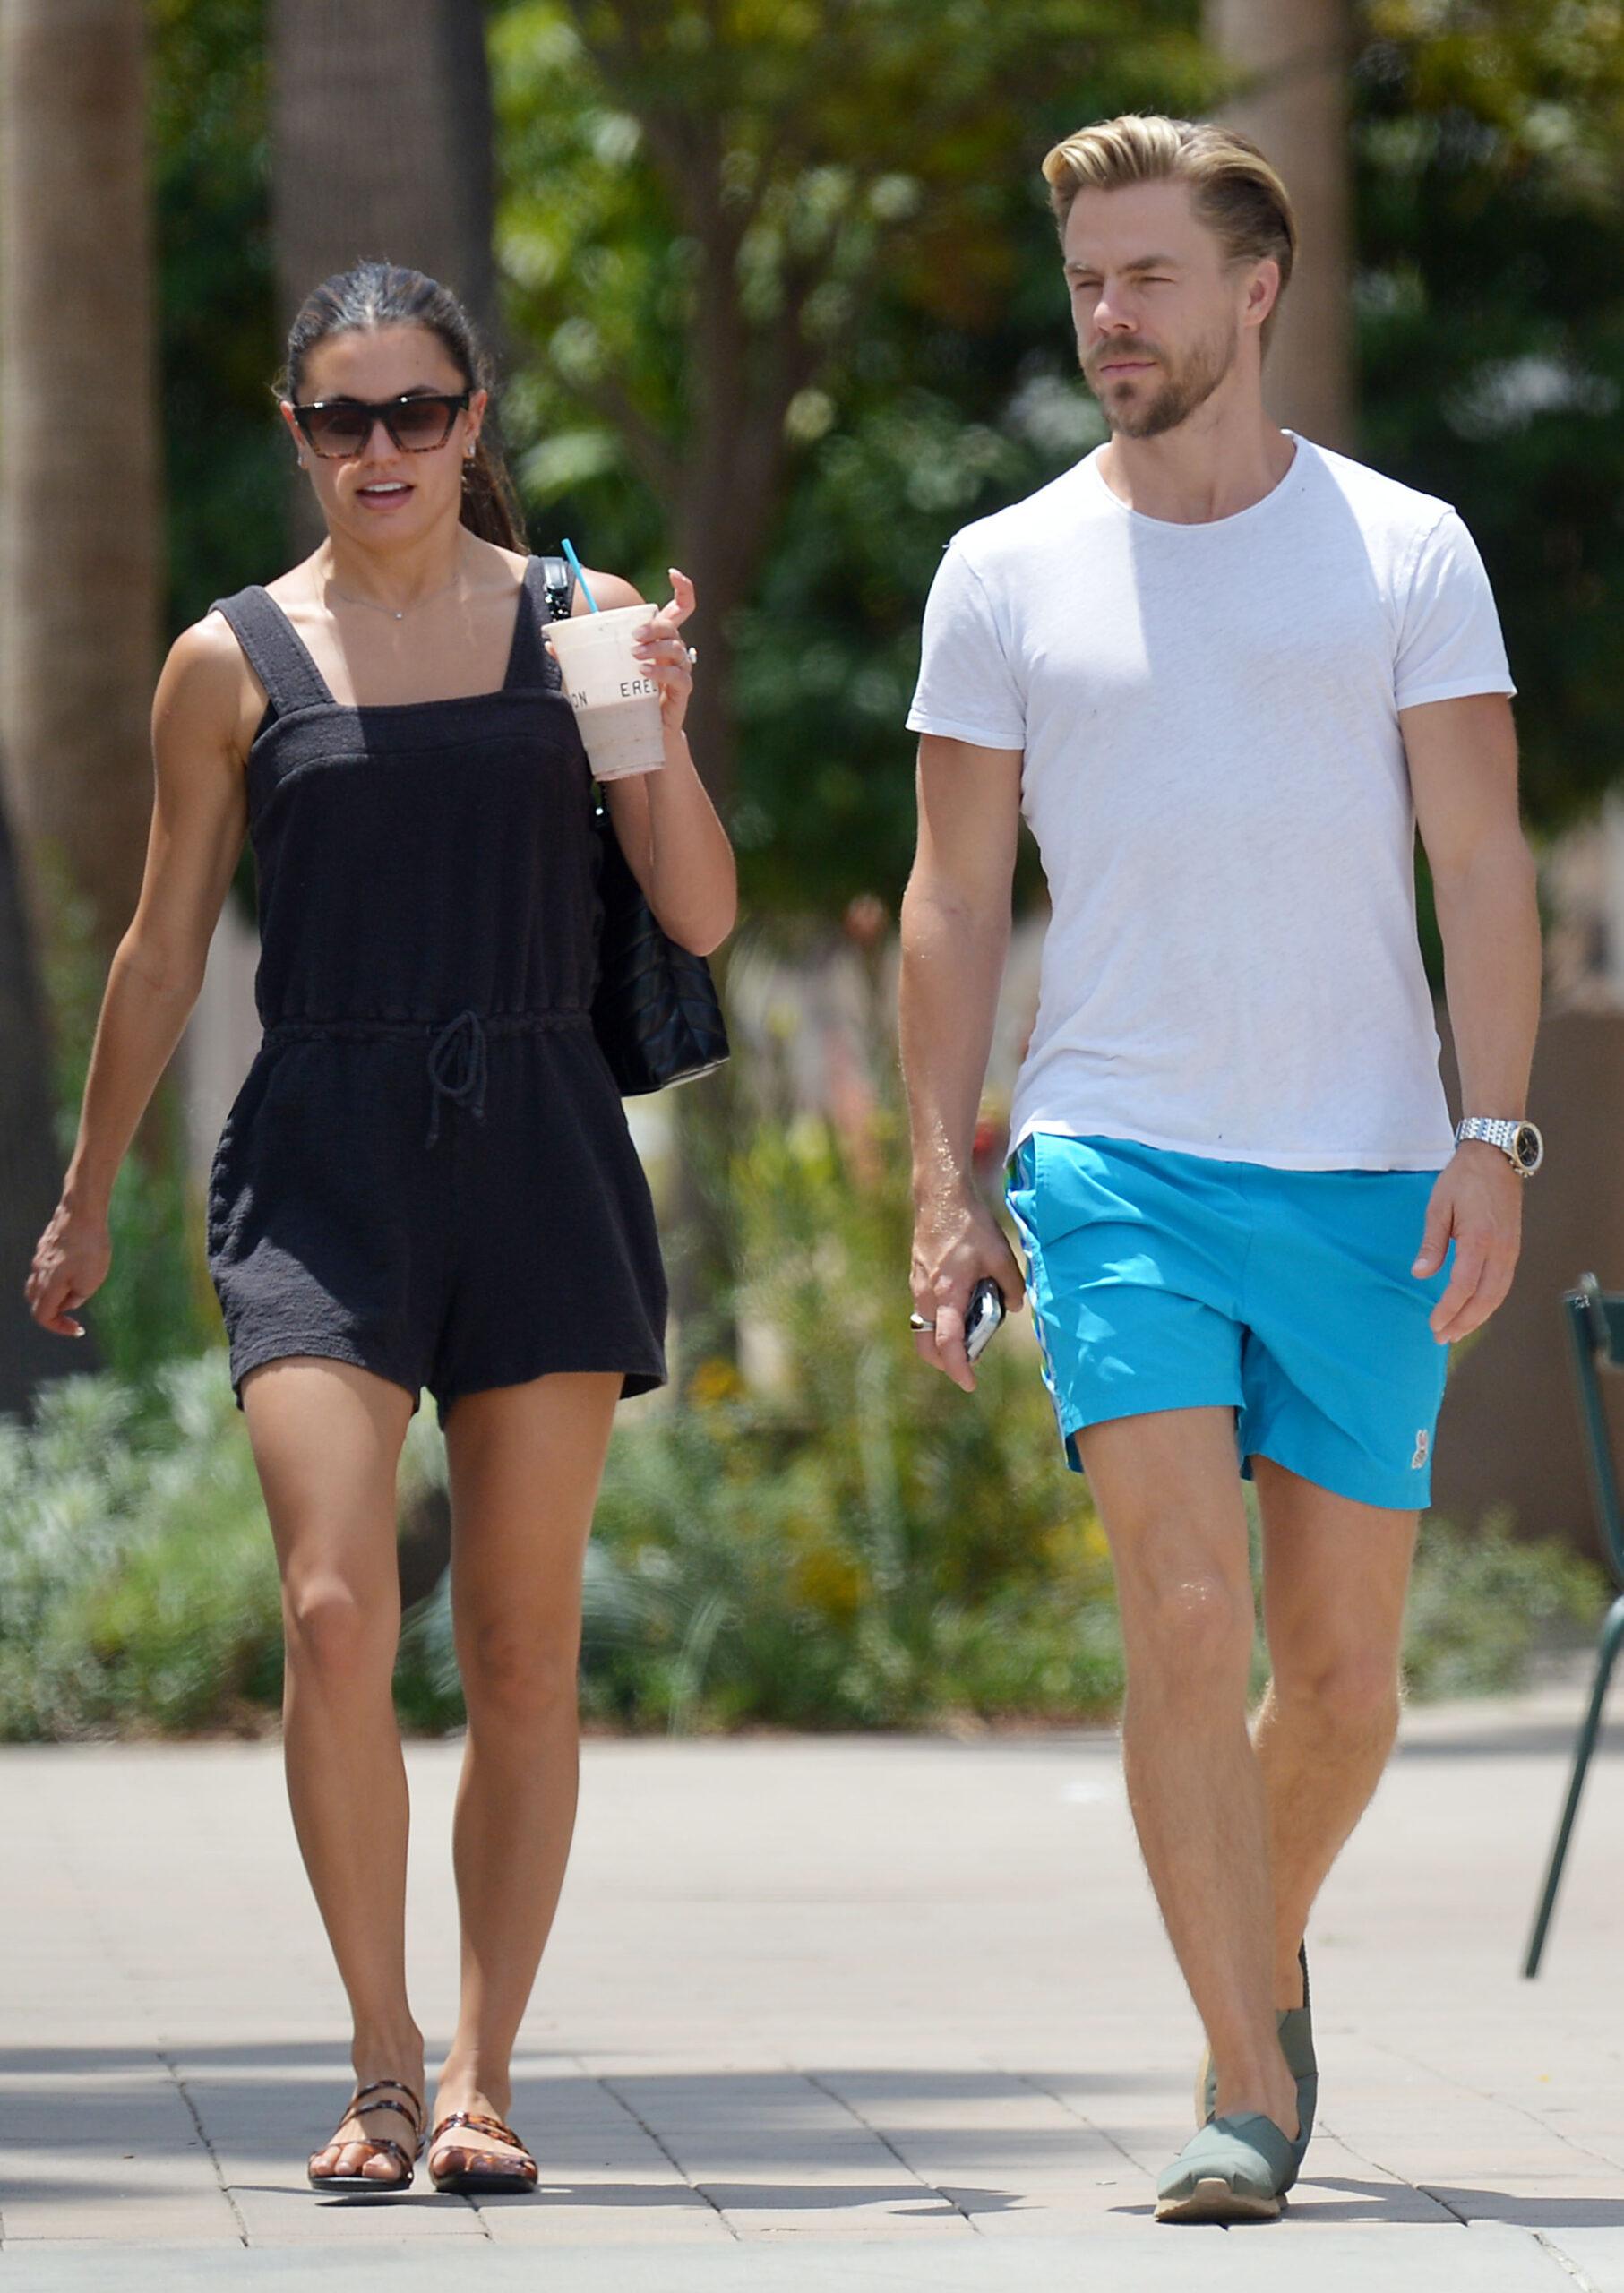 Derek Hough and fianc Hayley Erbert take a romantic stroll together after lunch in L A